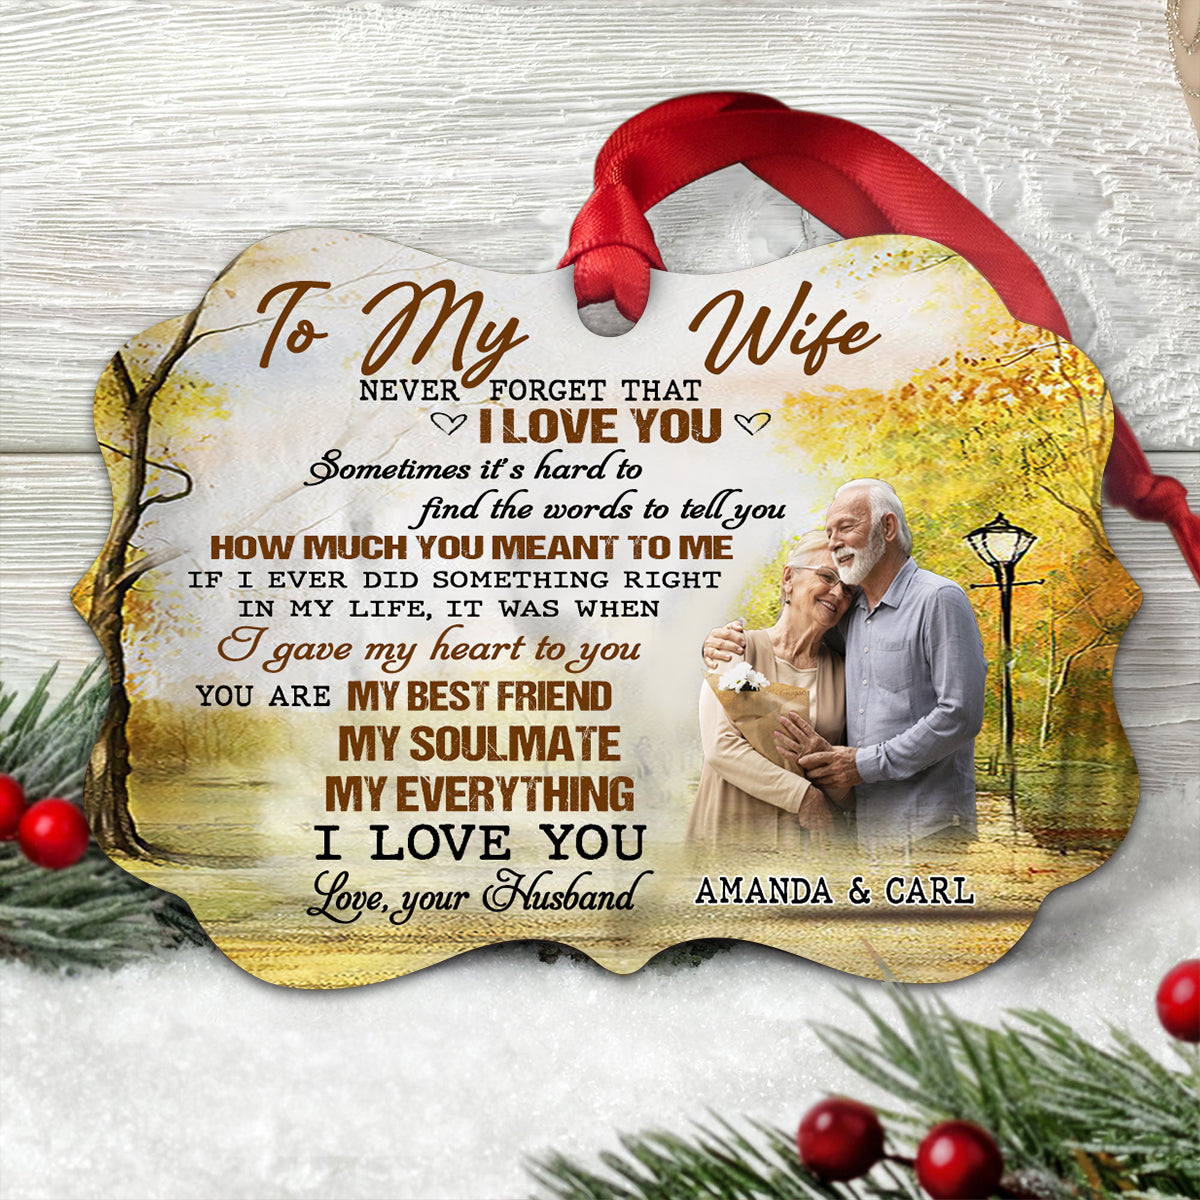 To My Wife Never Forget That I Love You - Personalized Photo Custom Shape Ornament - Gift Fom Husband, Gift For Wife 1_973c7eb5-9b95-4e08-9ac3-3035186795e6.jpg?v=1694235163